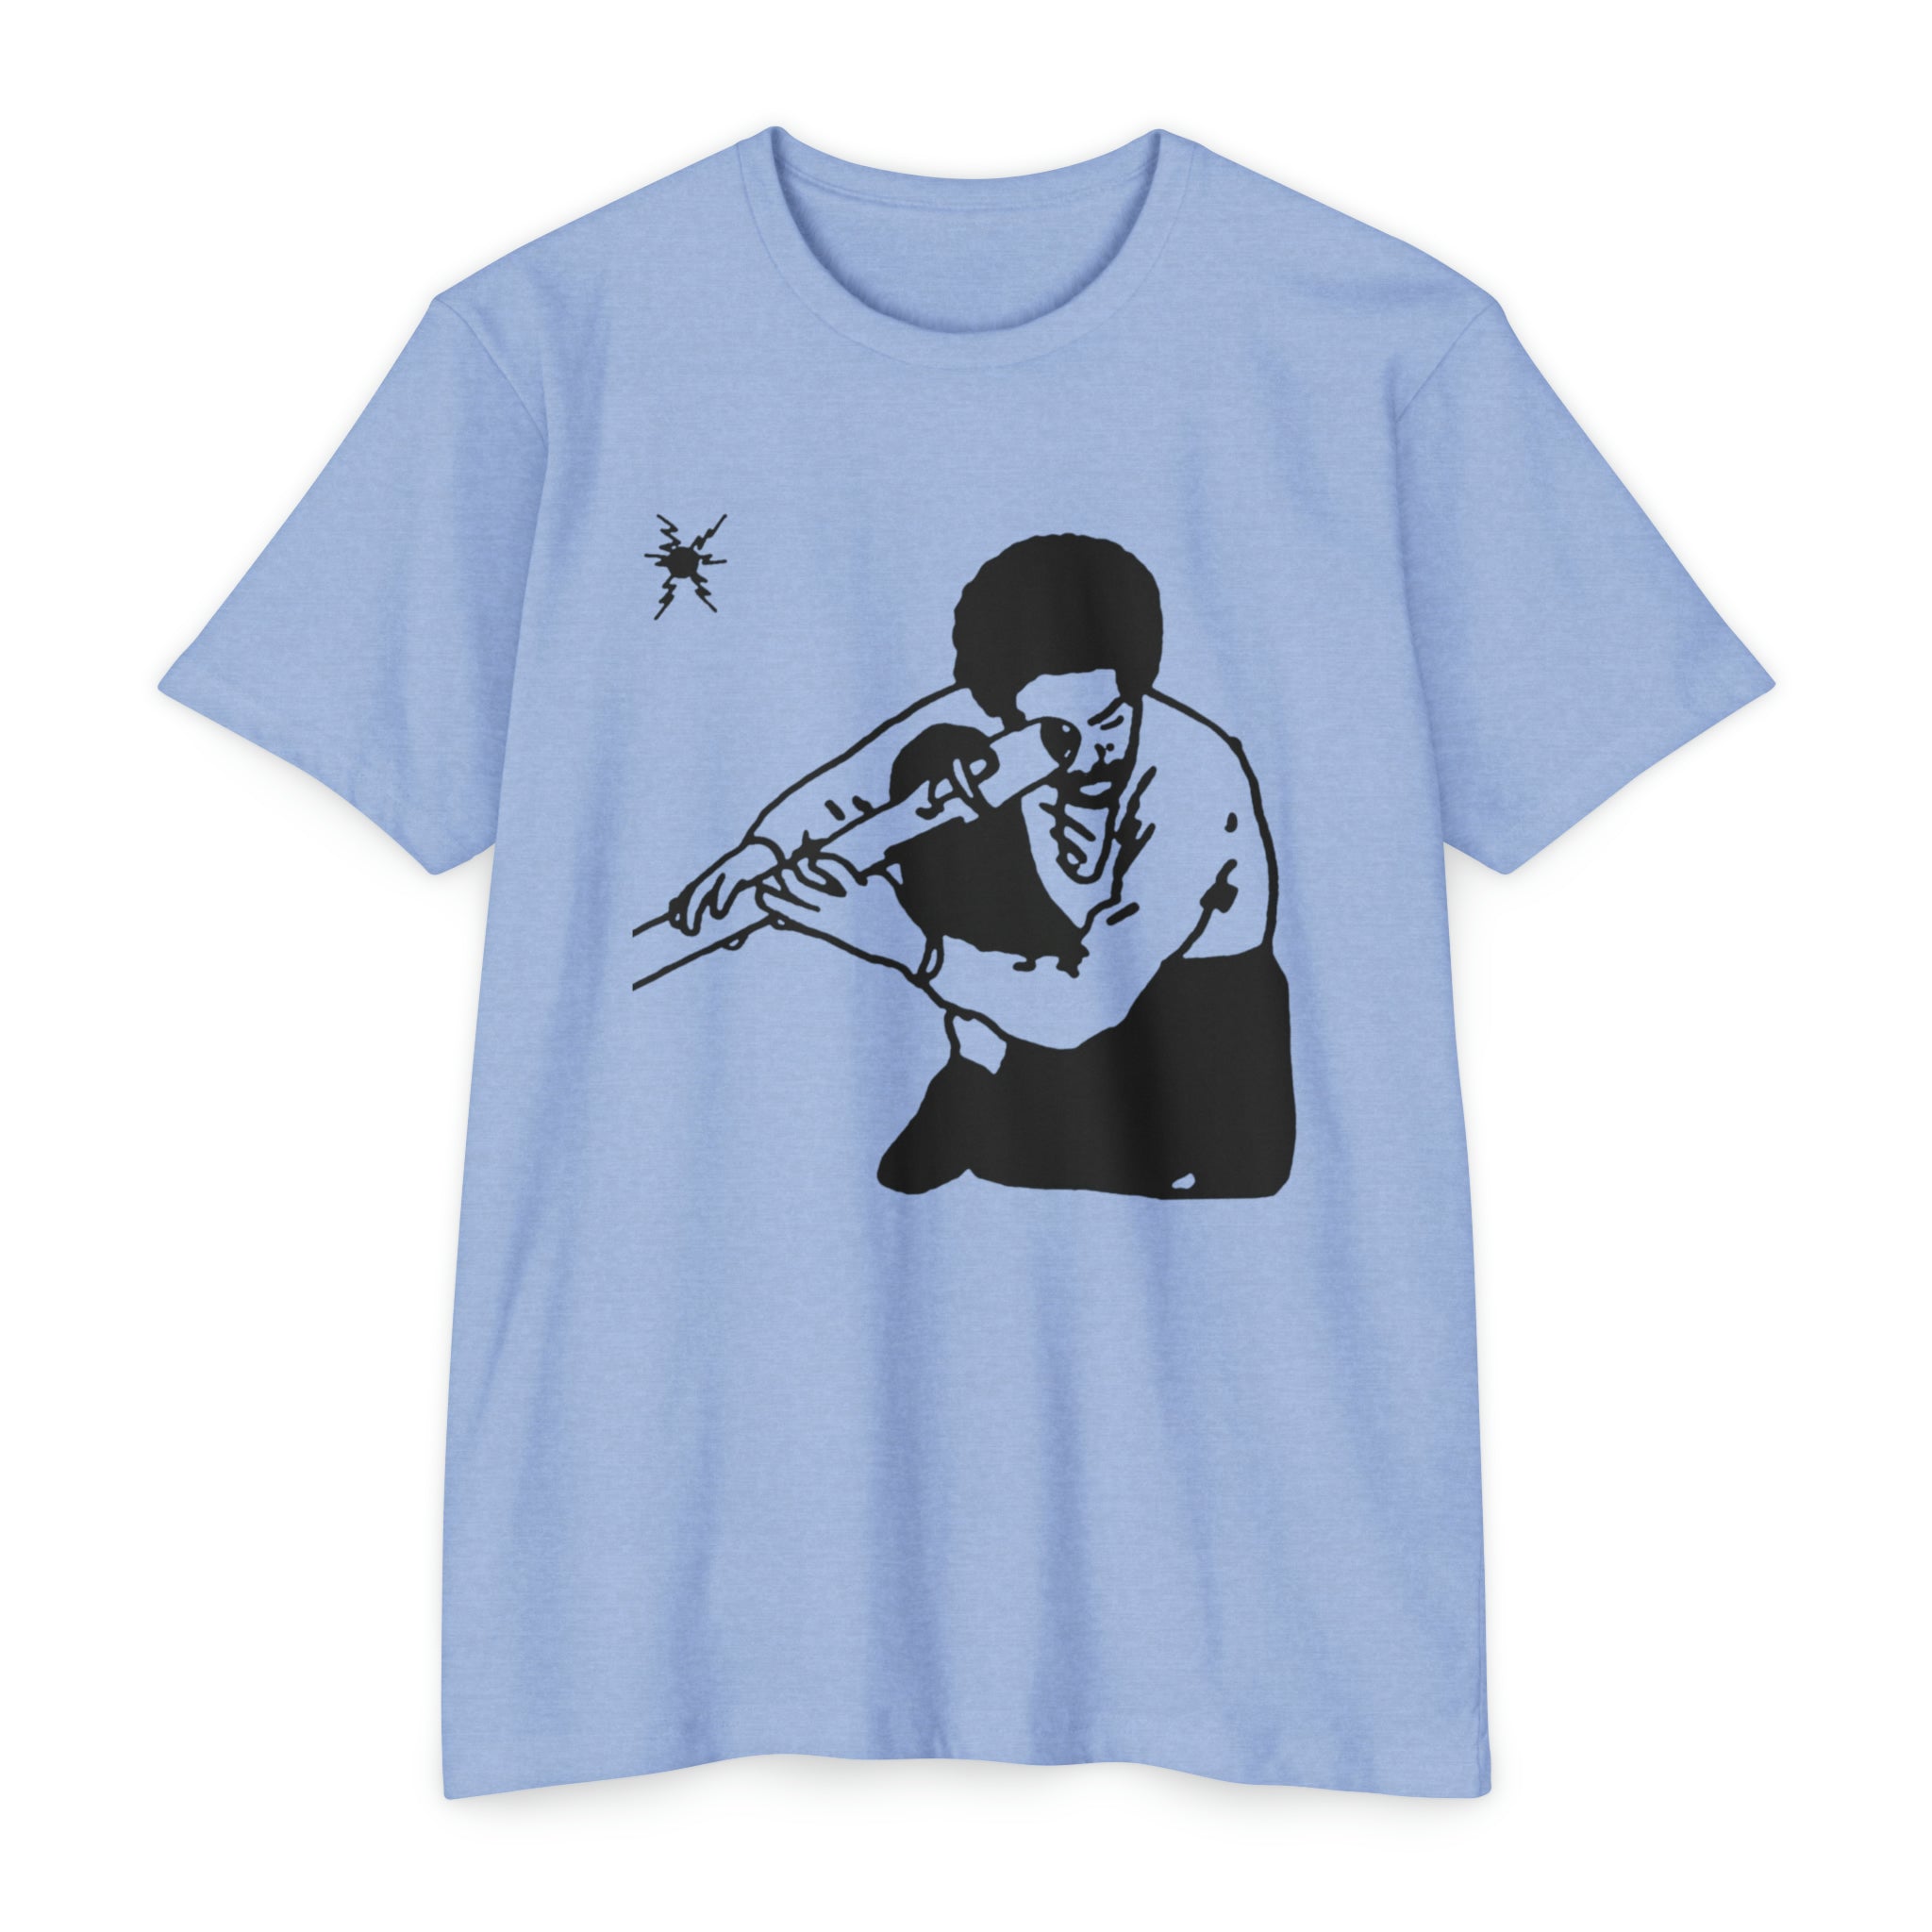 Andre 3000 - New Blue Moon T-shirt